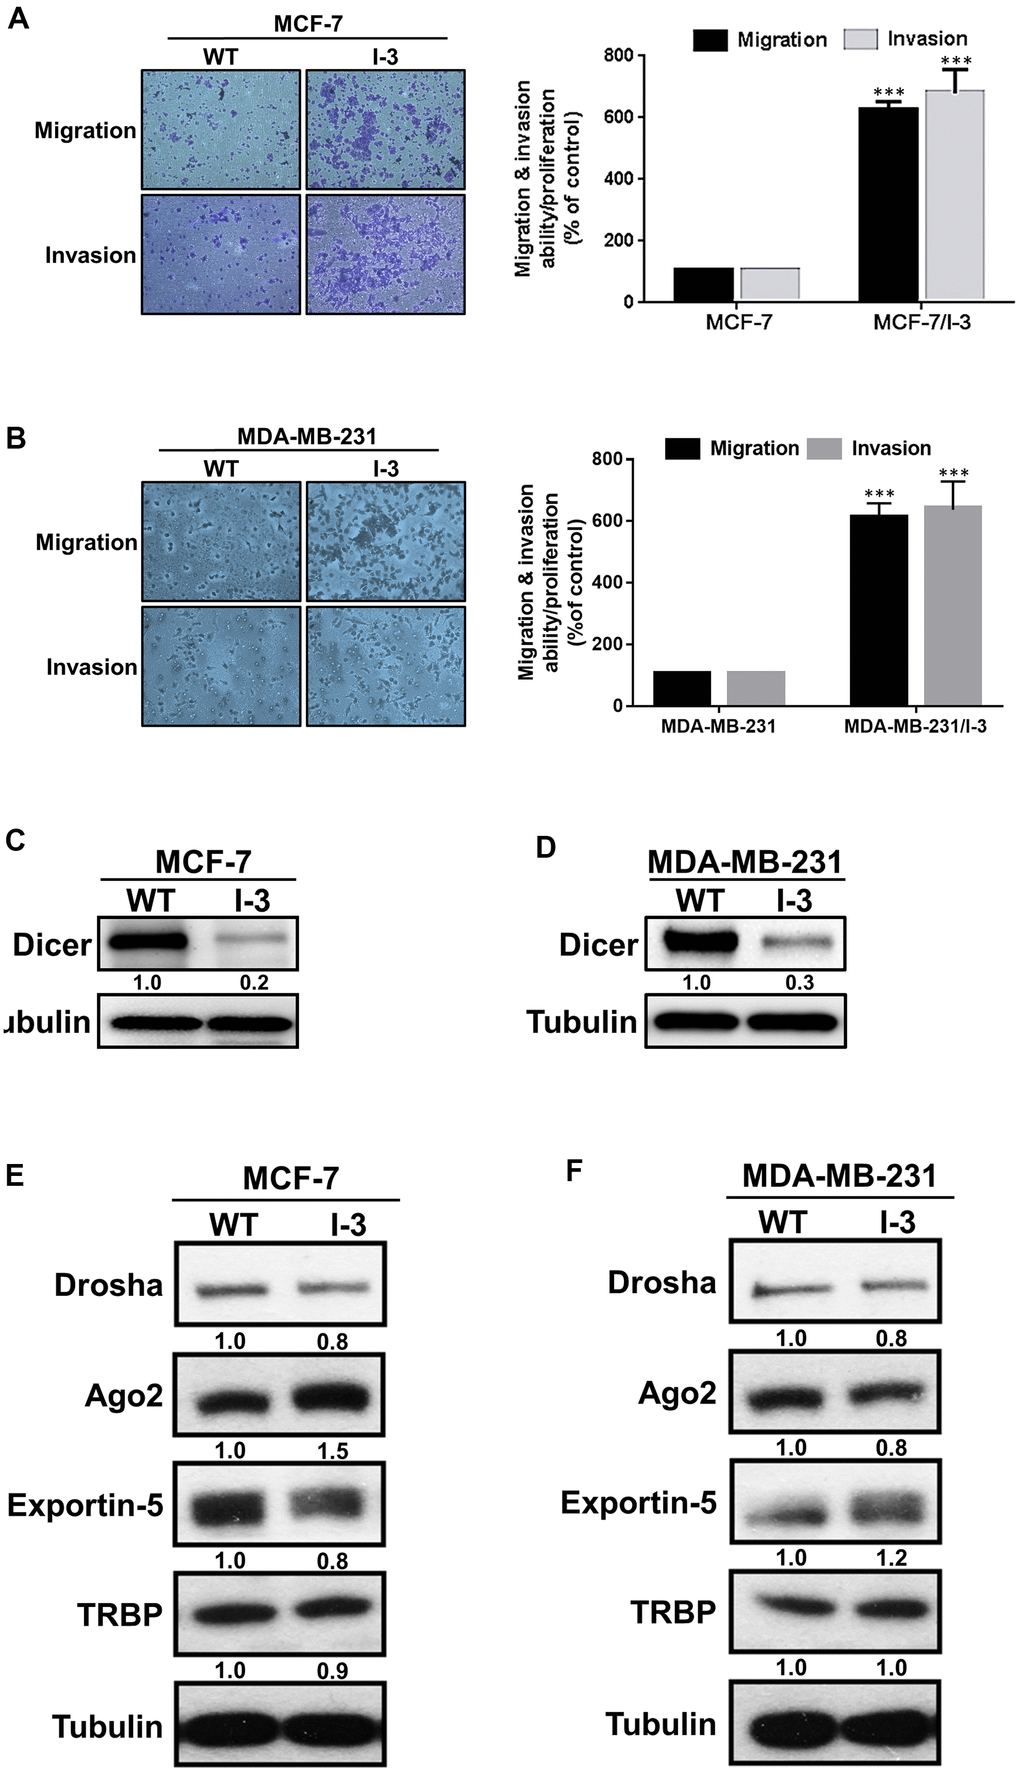 Dicer is significantly downregulated in highly invasive breast cancer cells. (A, B) A panel of highly invasive breast cancer (MCF-7/I-3 and MDA-MB-231/I-3) cells was established, and their migration and invasion abilities were evaluated by performing cell migration and invasion assays, respectively. (C, D) The protein expression levels of Dicer in highly invasive cells (MCF-7/I-3 and MDA-MB-231/I-3) and parental cells (MCF-7 and MDA-MB-231). (E, F) Analysis of miRNA biogenesis–related protein expression levels in highly invasive cells (MCF-7/I-3 and MDA-MB-231/I-3) cells compared with those in parental cells (MCF-7 and MDA-MB-231) through Western blotting. Data are presented as the mean ± standard error mean of three independent experiments. ***P 